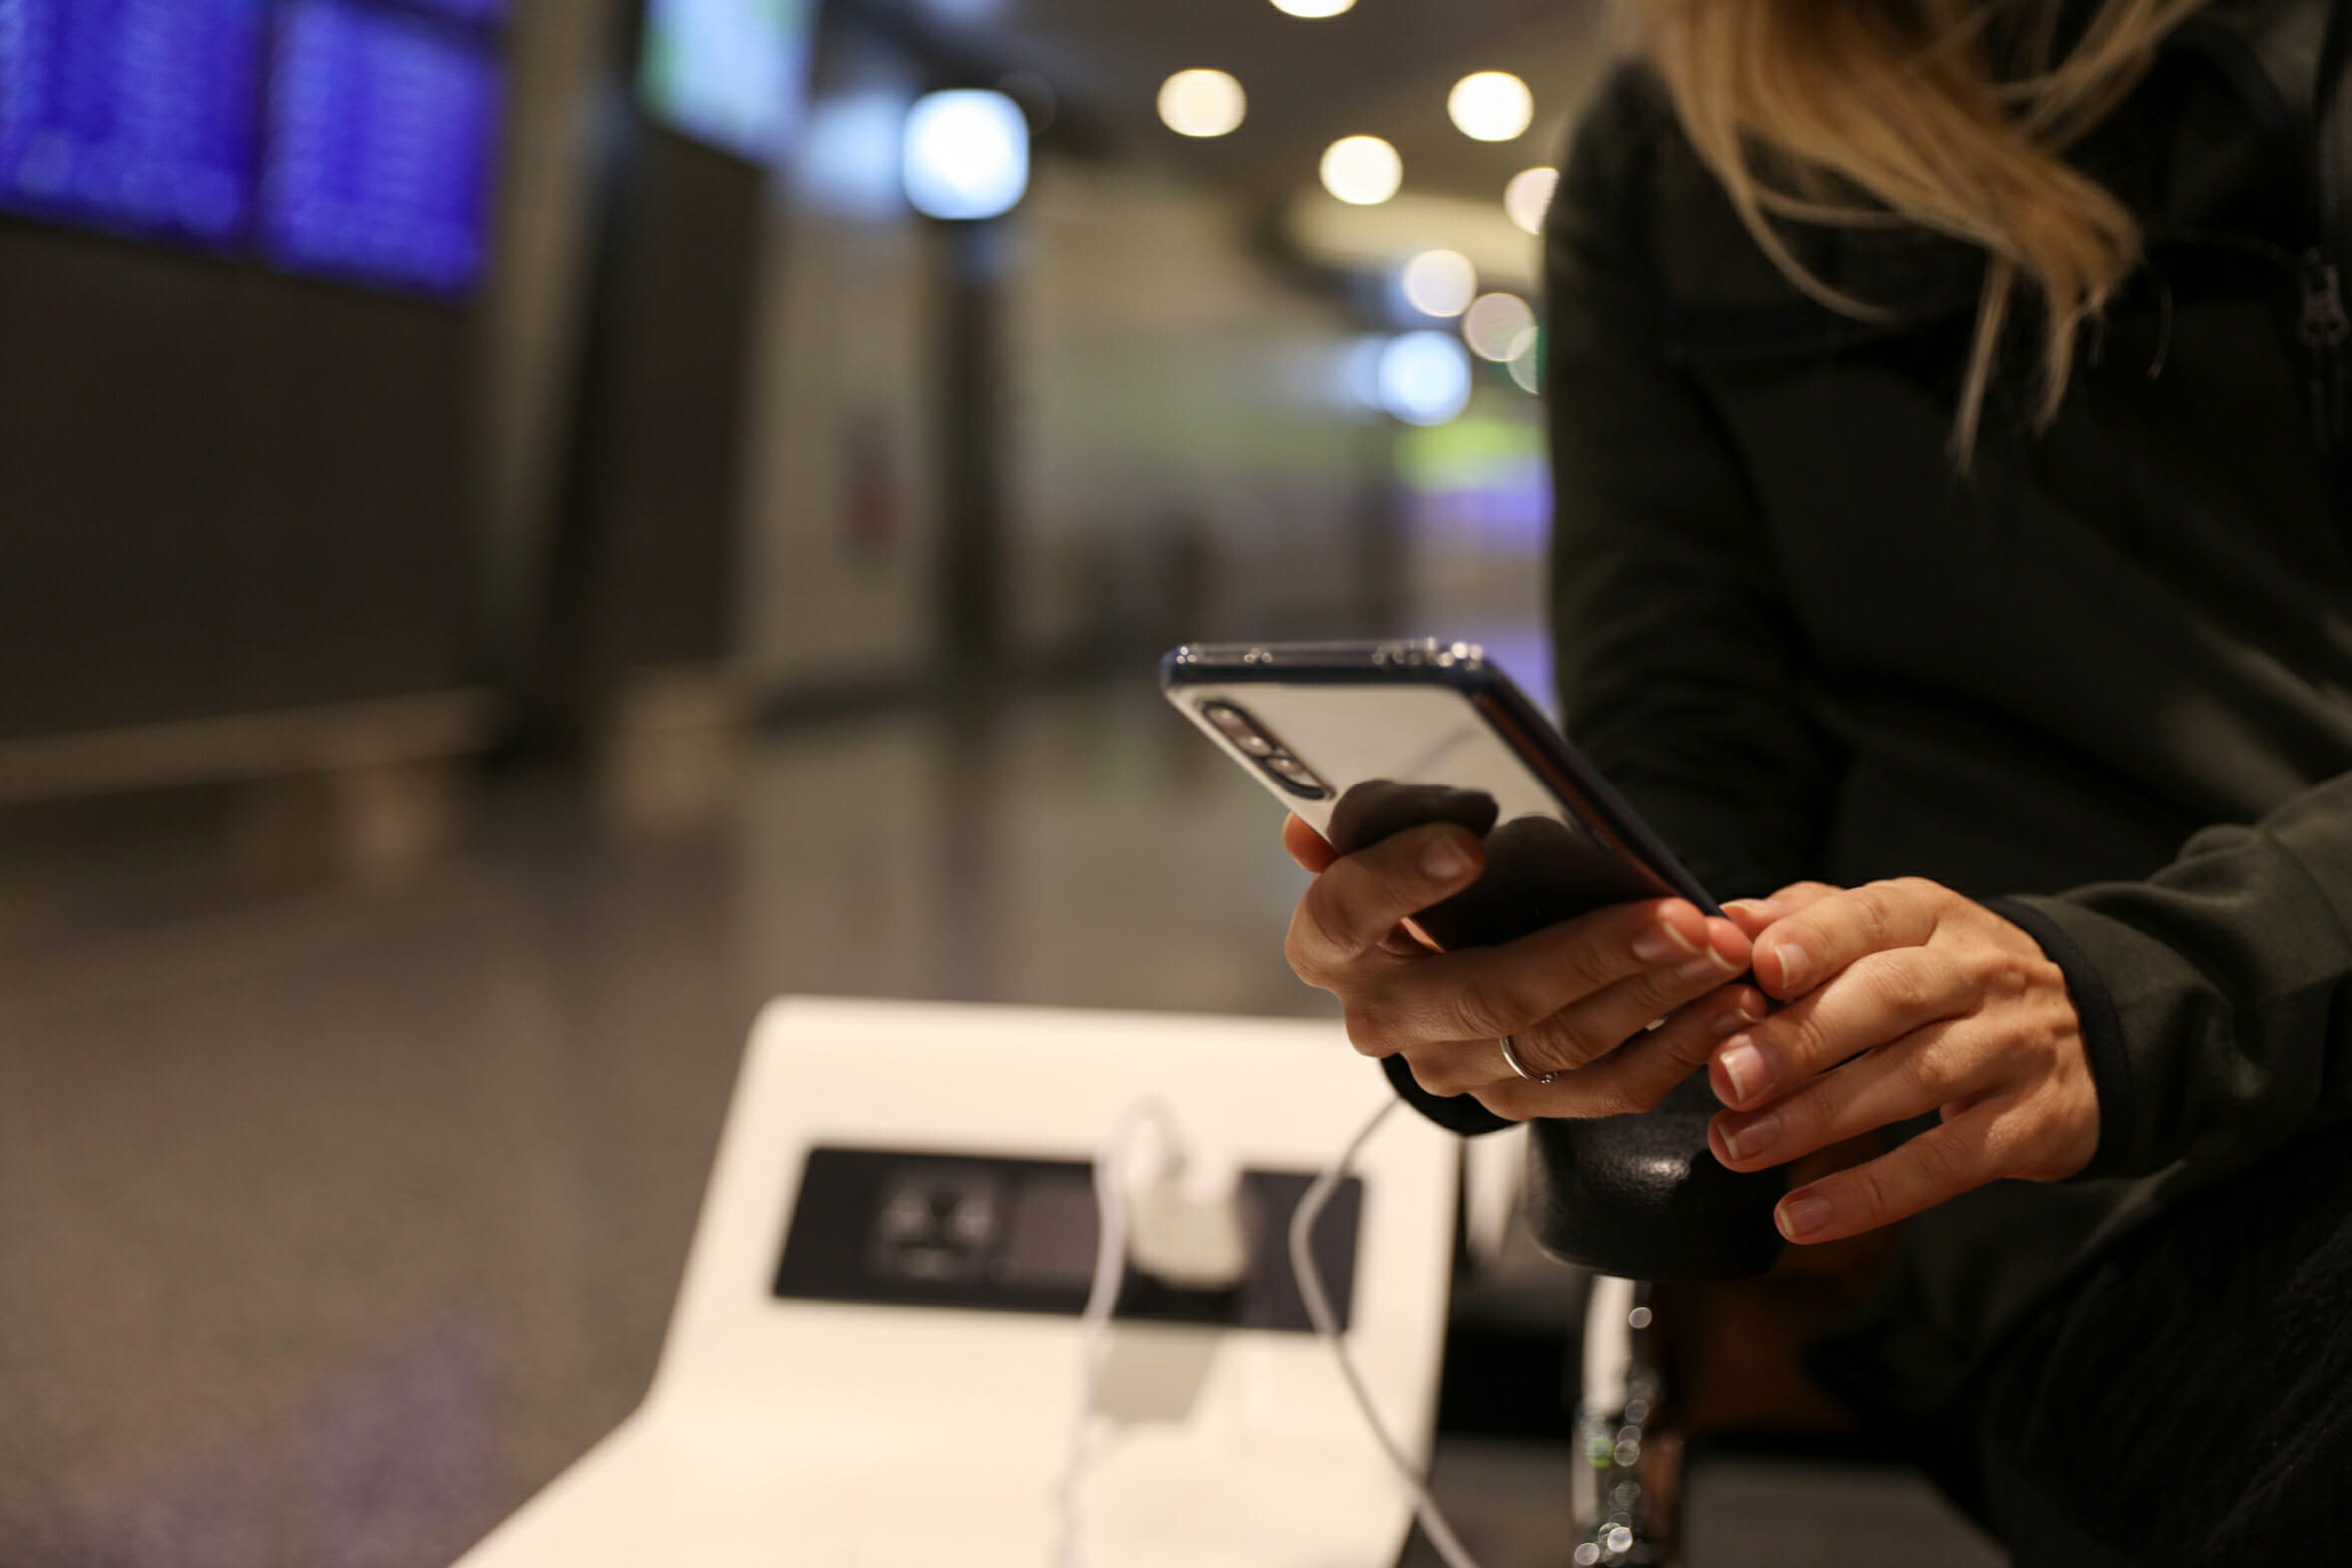 Stay connected during your travel and flight, Woman using public phone charging station at the airport